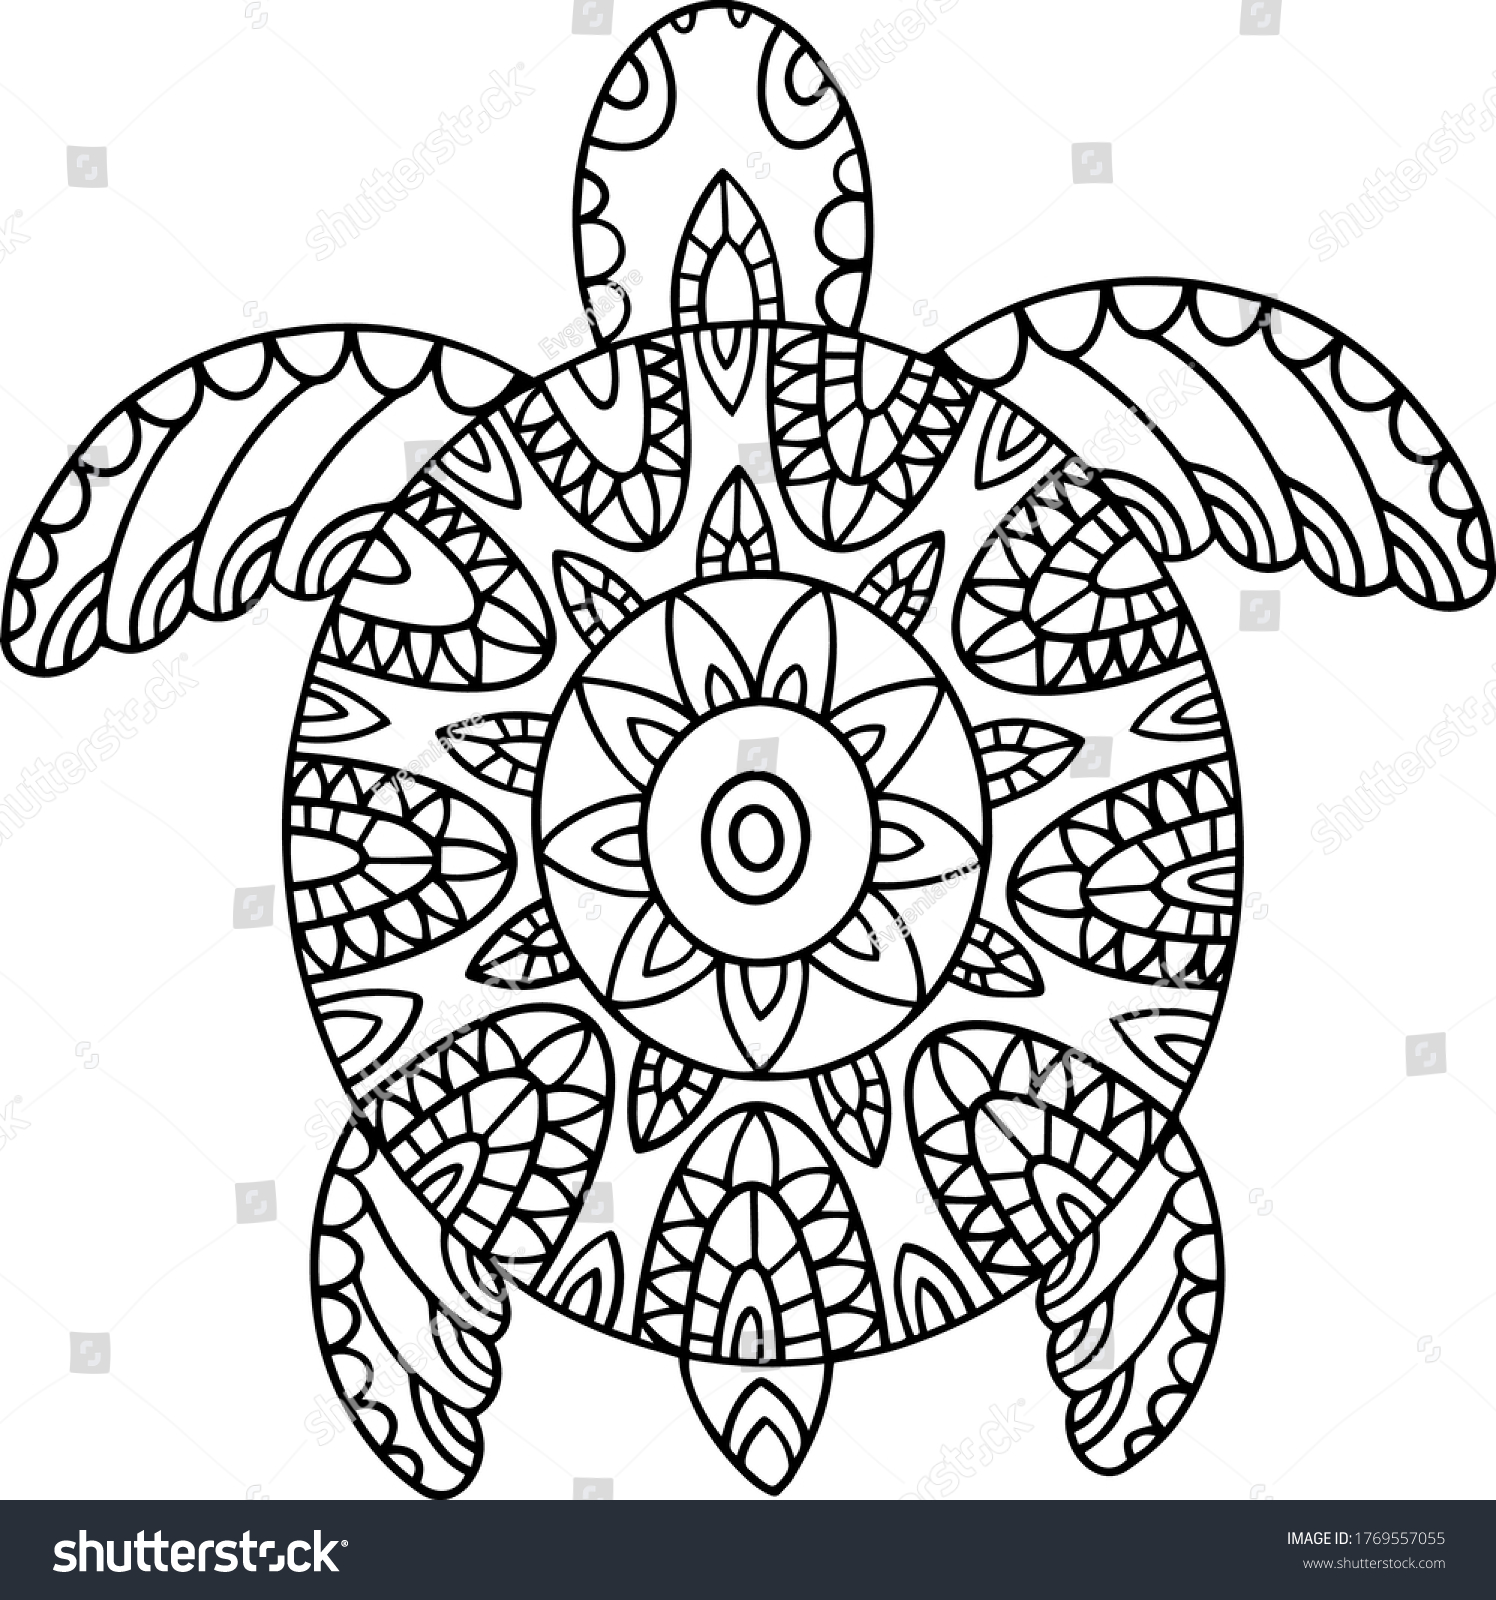 SVG of Picture of a sea turtle, coloring, black lines, silhouette of a turtle, black and white, print sea turtle, marine animal reptile, coloring book-antistress, sea turtle svg